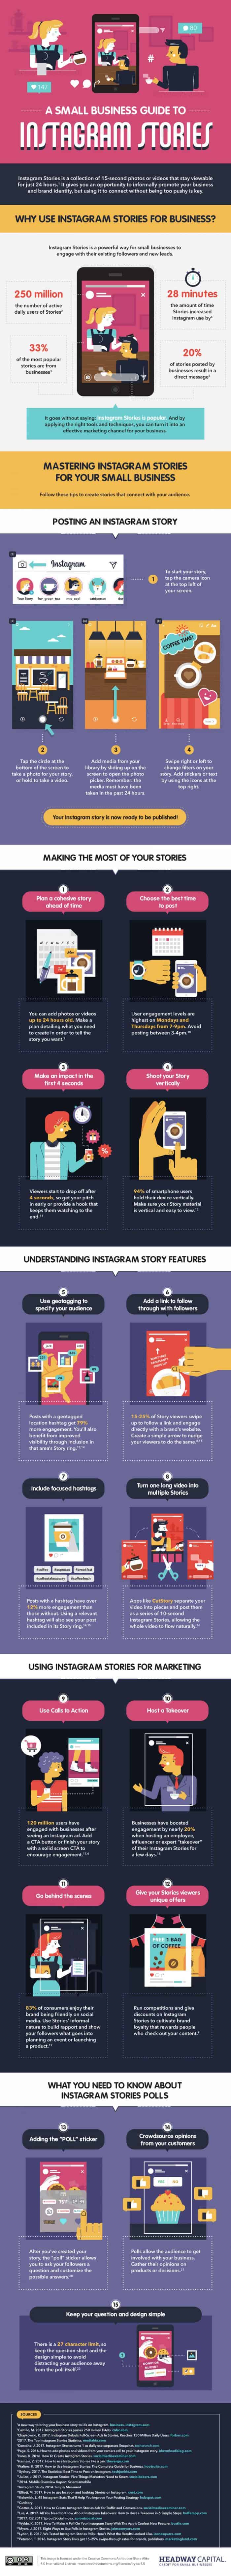 Small Buiness Guide To Instagram Stories